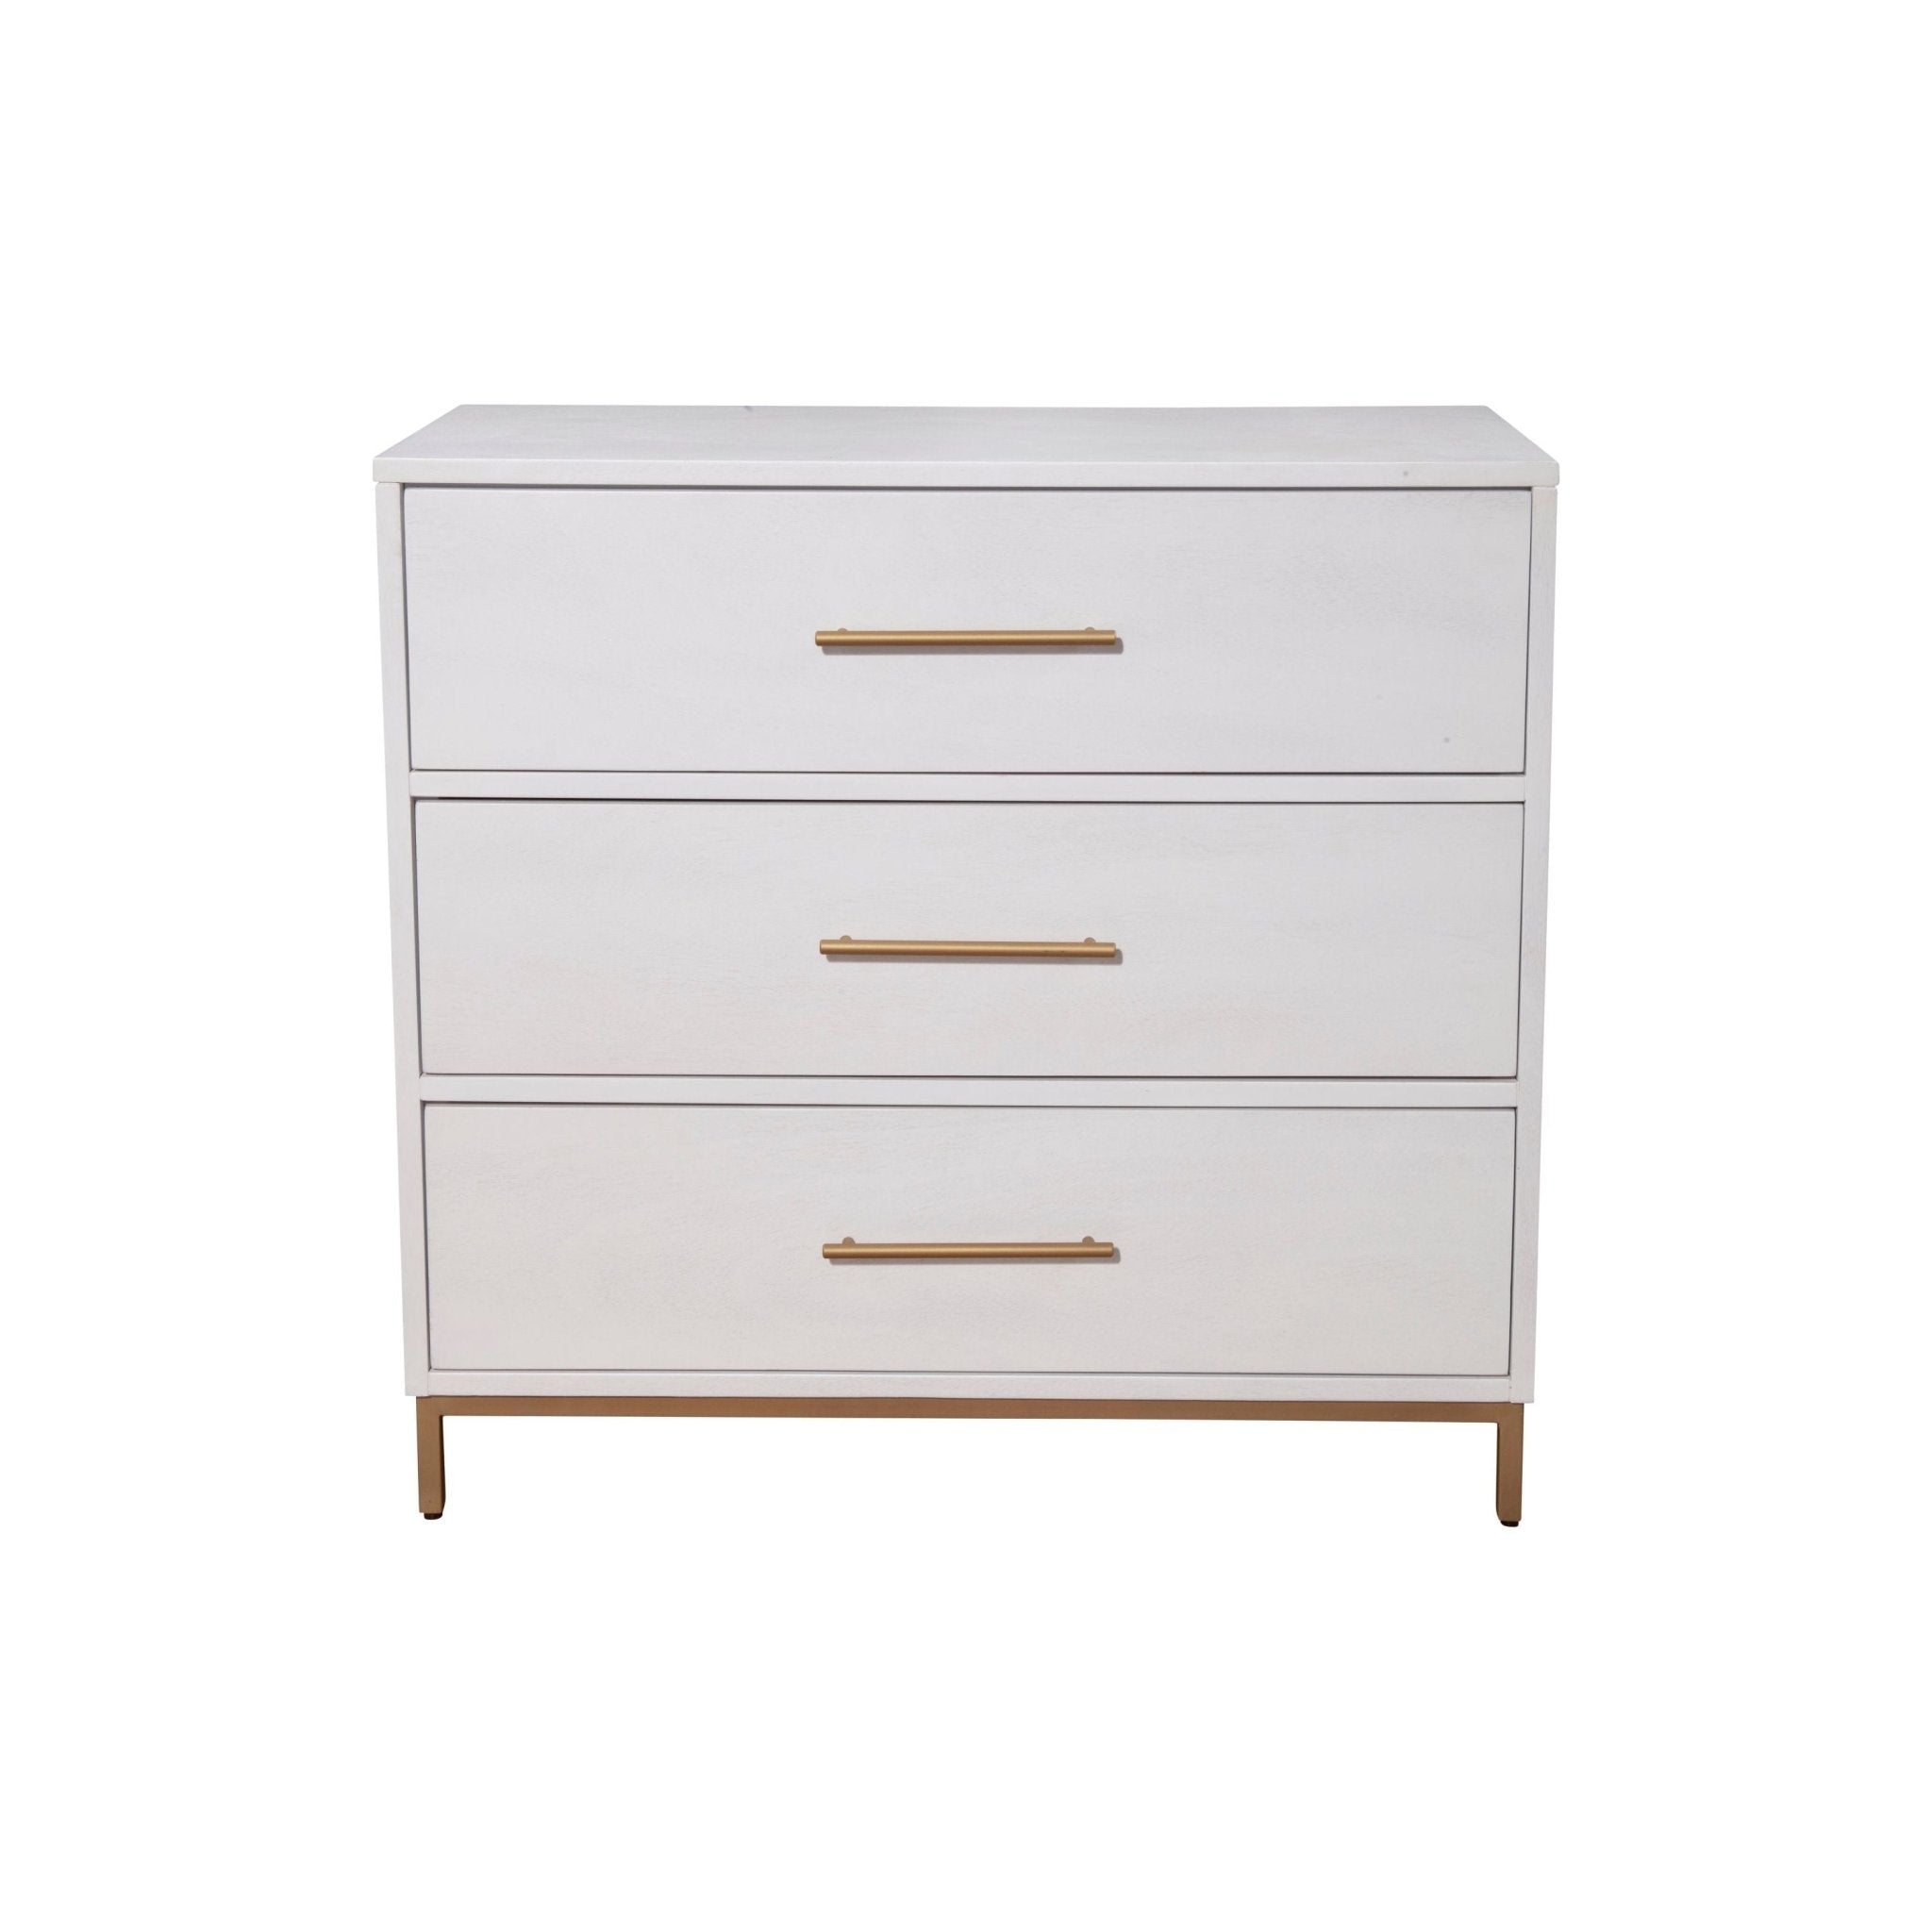 Madelyn Three Drawer Small Chest, White